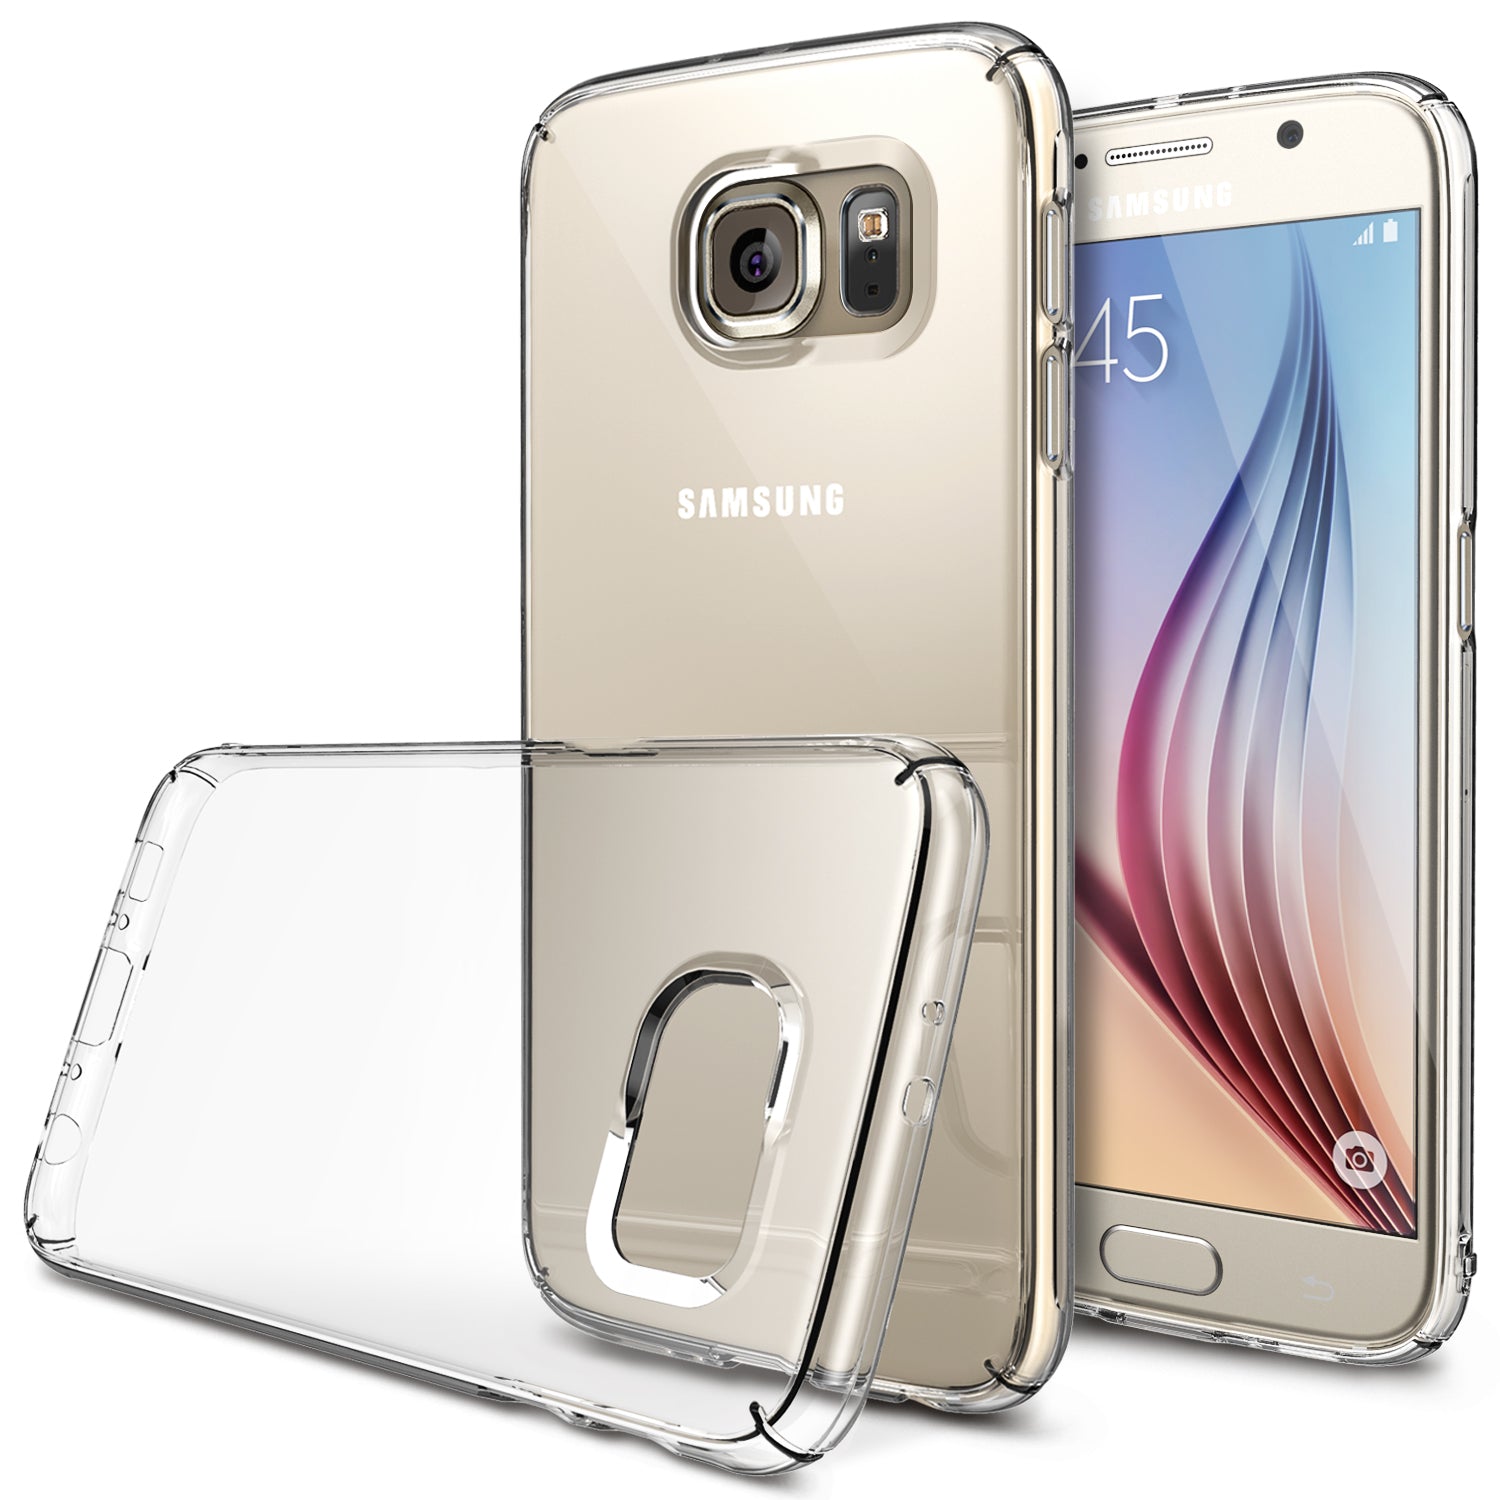 ringke slim premium hard pc protective back cover case for galaxy s6 clear